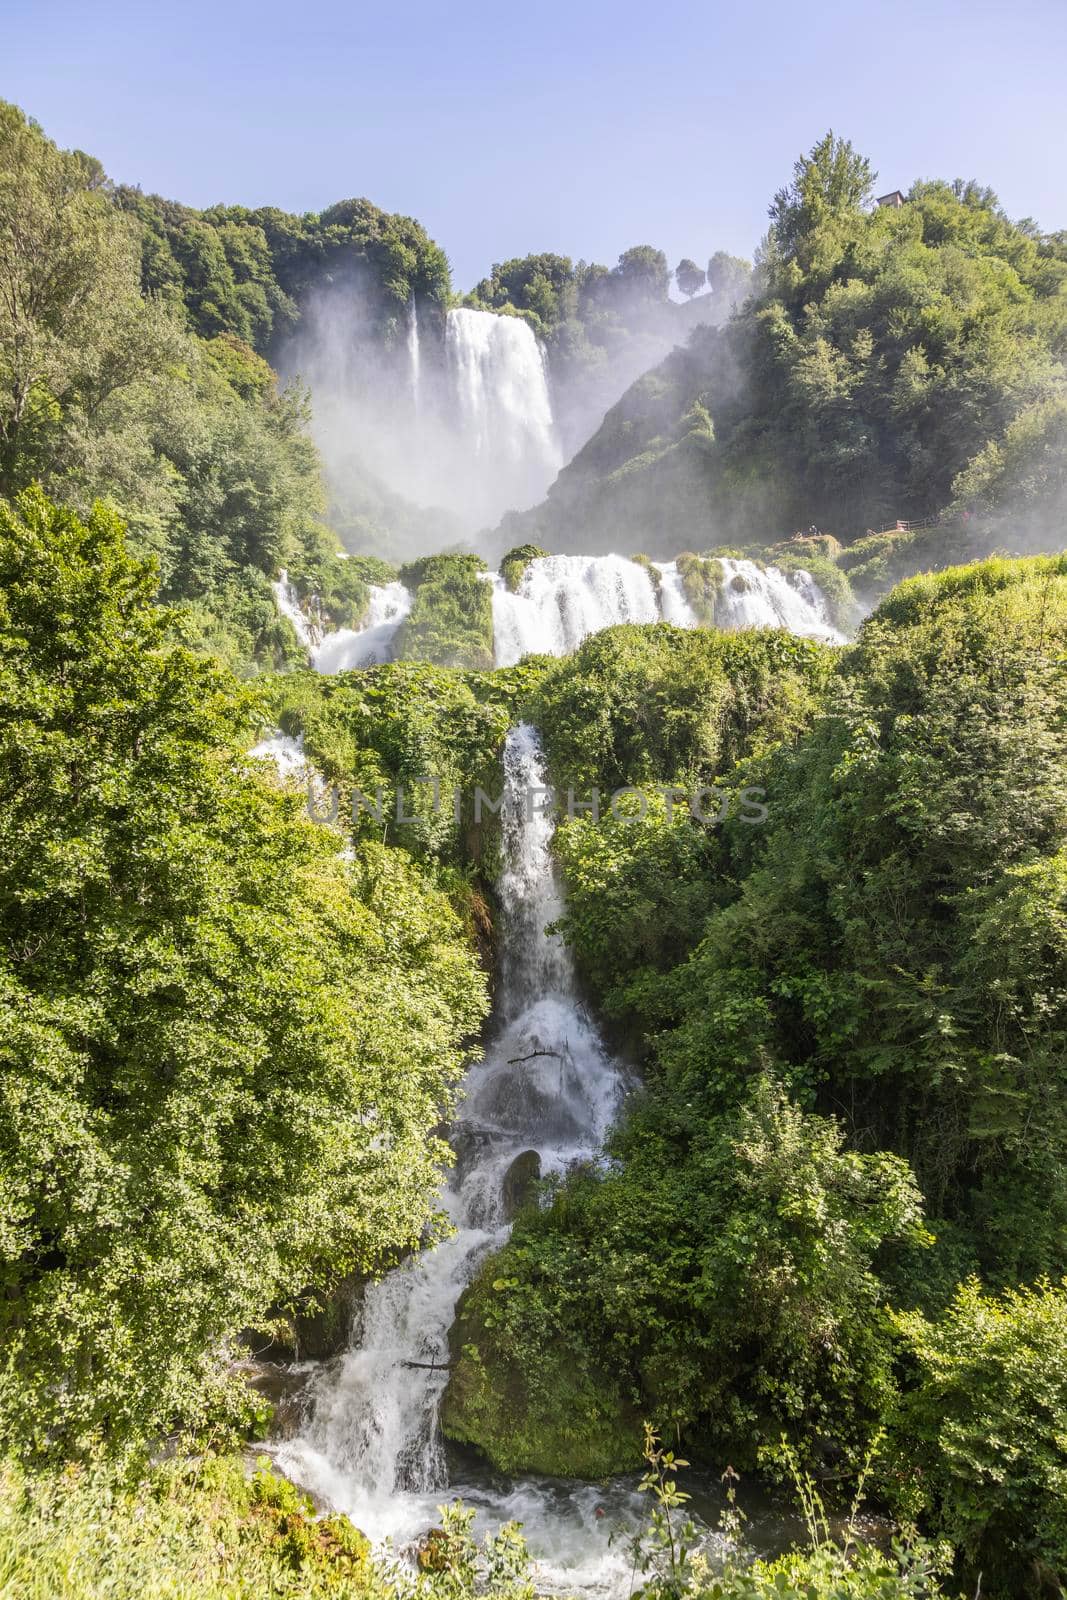 Marmore waterfall in Umbria region, Italy. Amazing cascade splashing into nature. by Perseomedusa